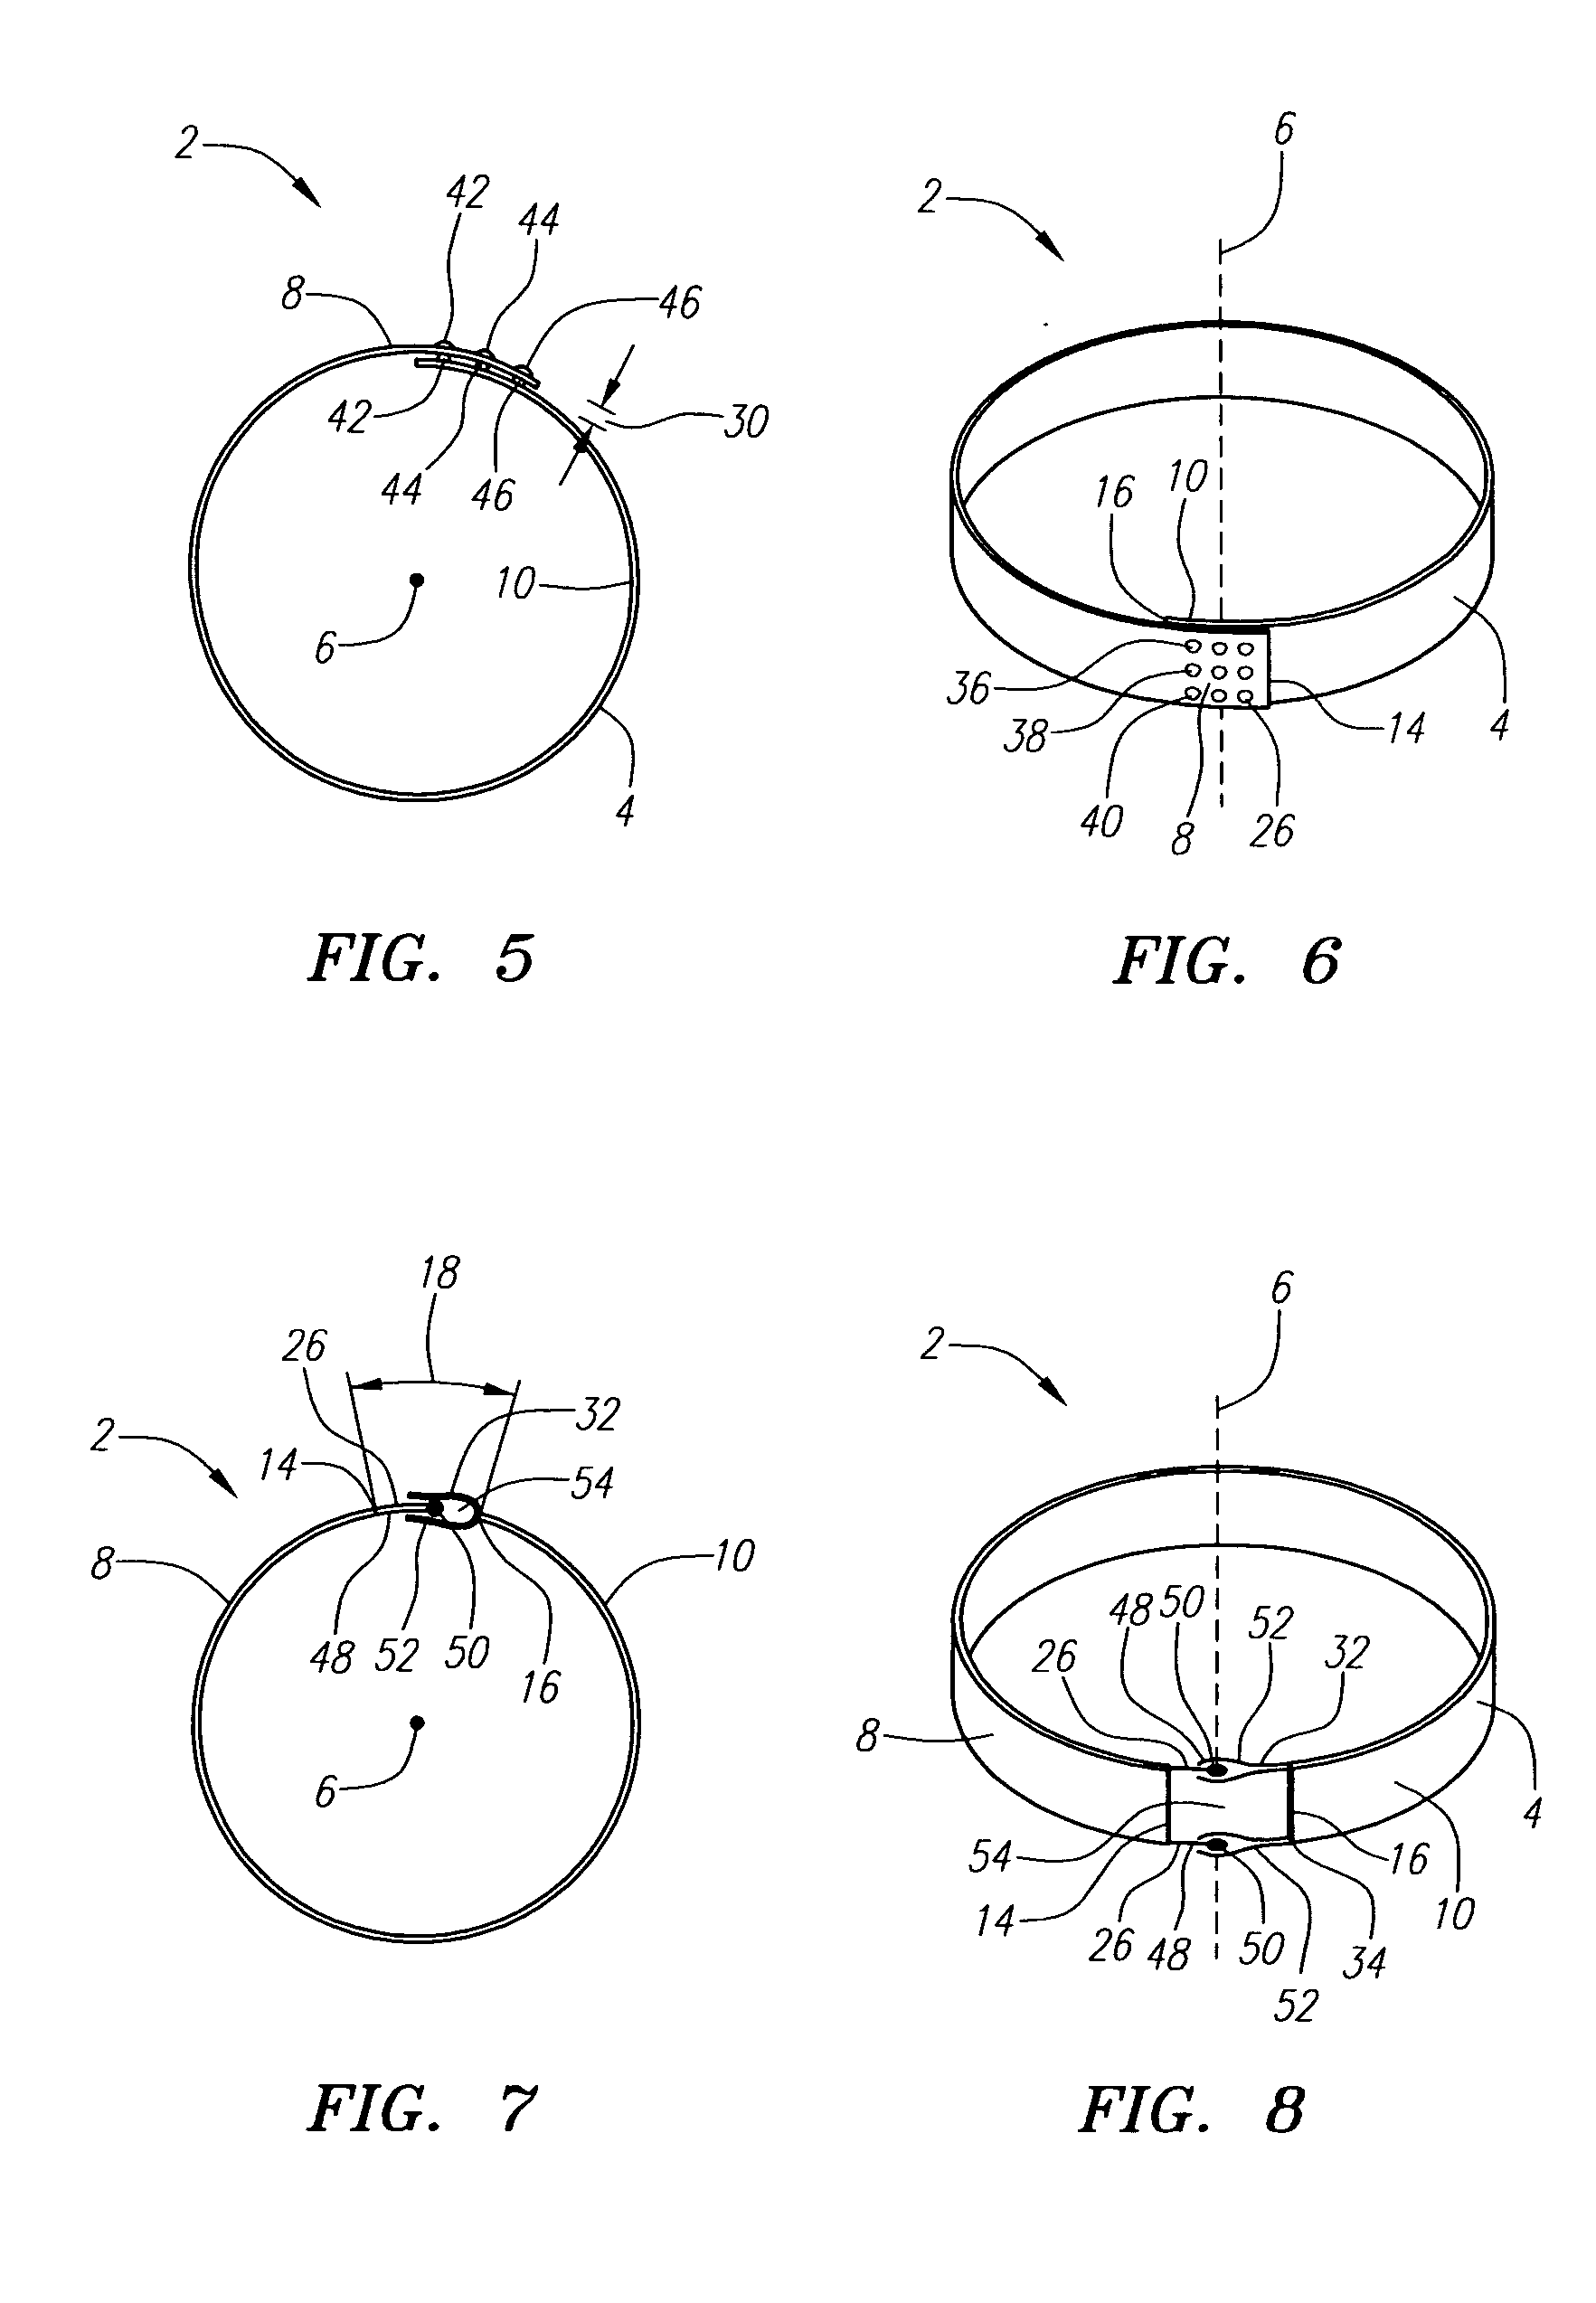 Biologically implantable prosthesis and methods of using the same